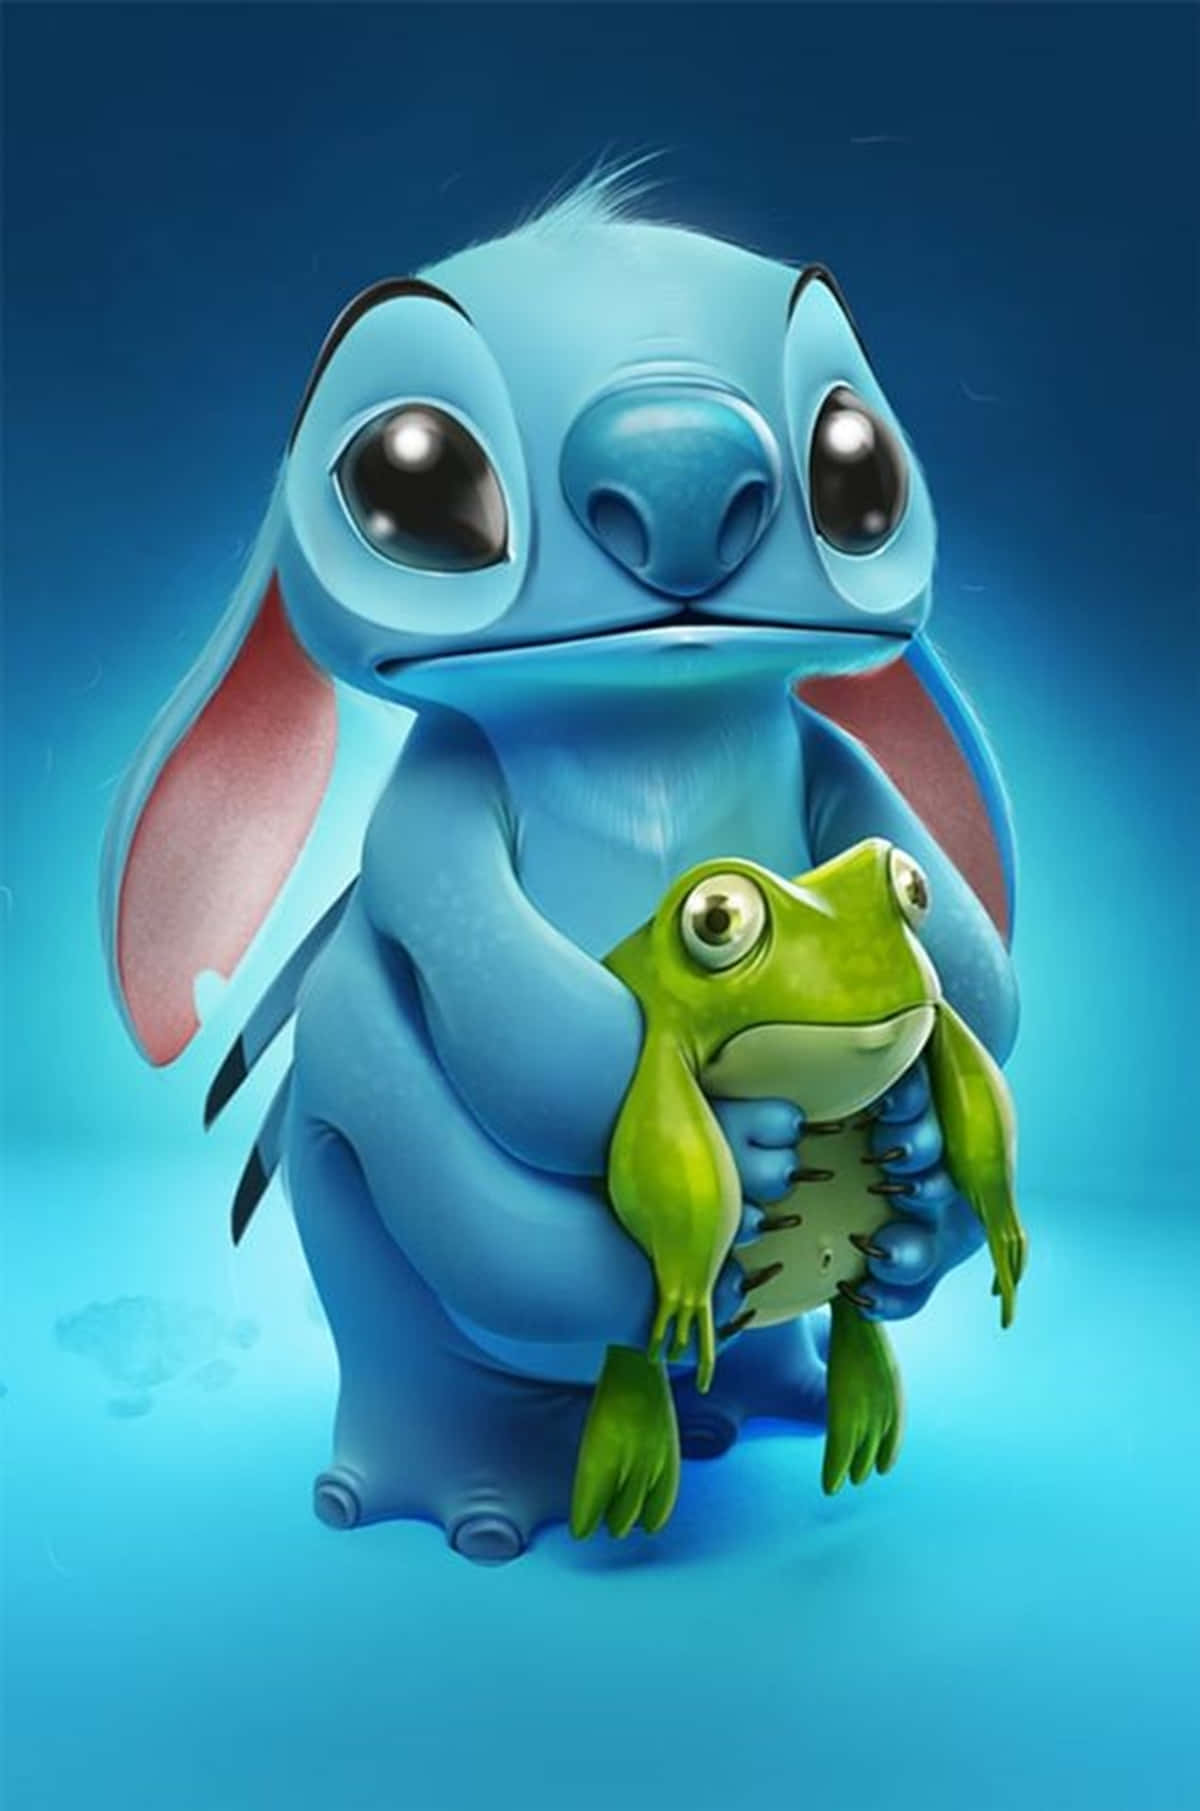 Adorable Stitch Holding A Green Frog Wallpaper